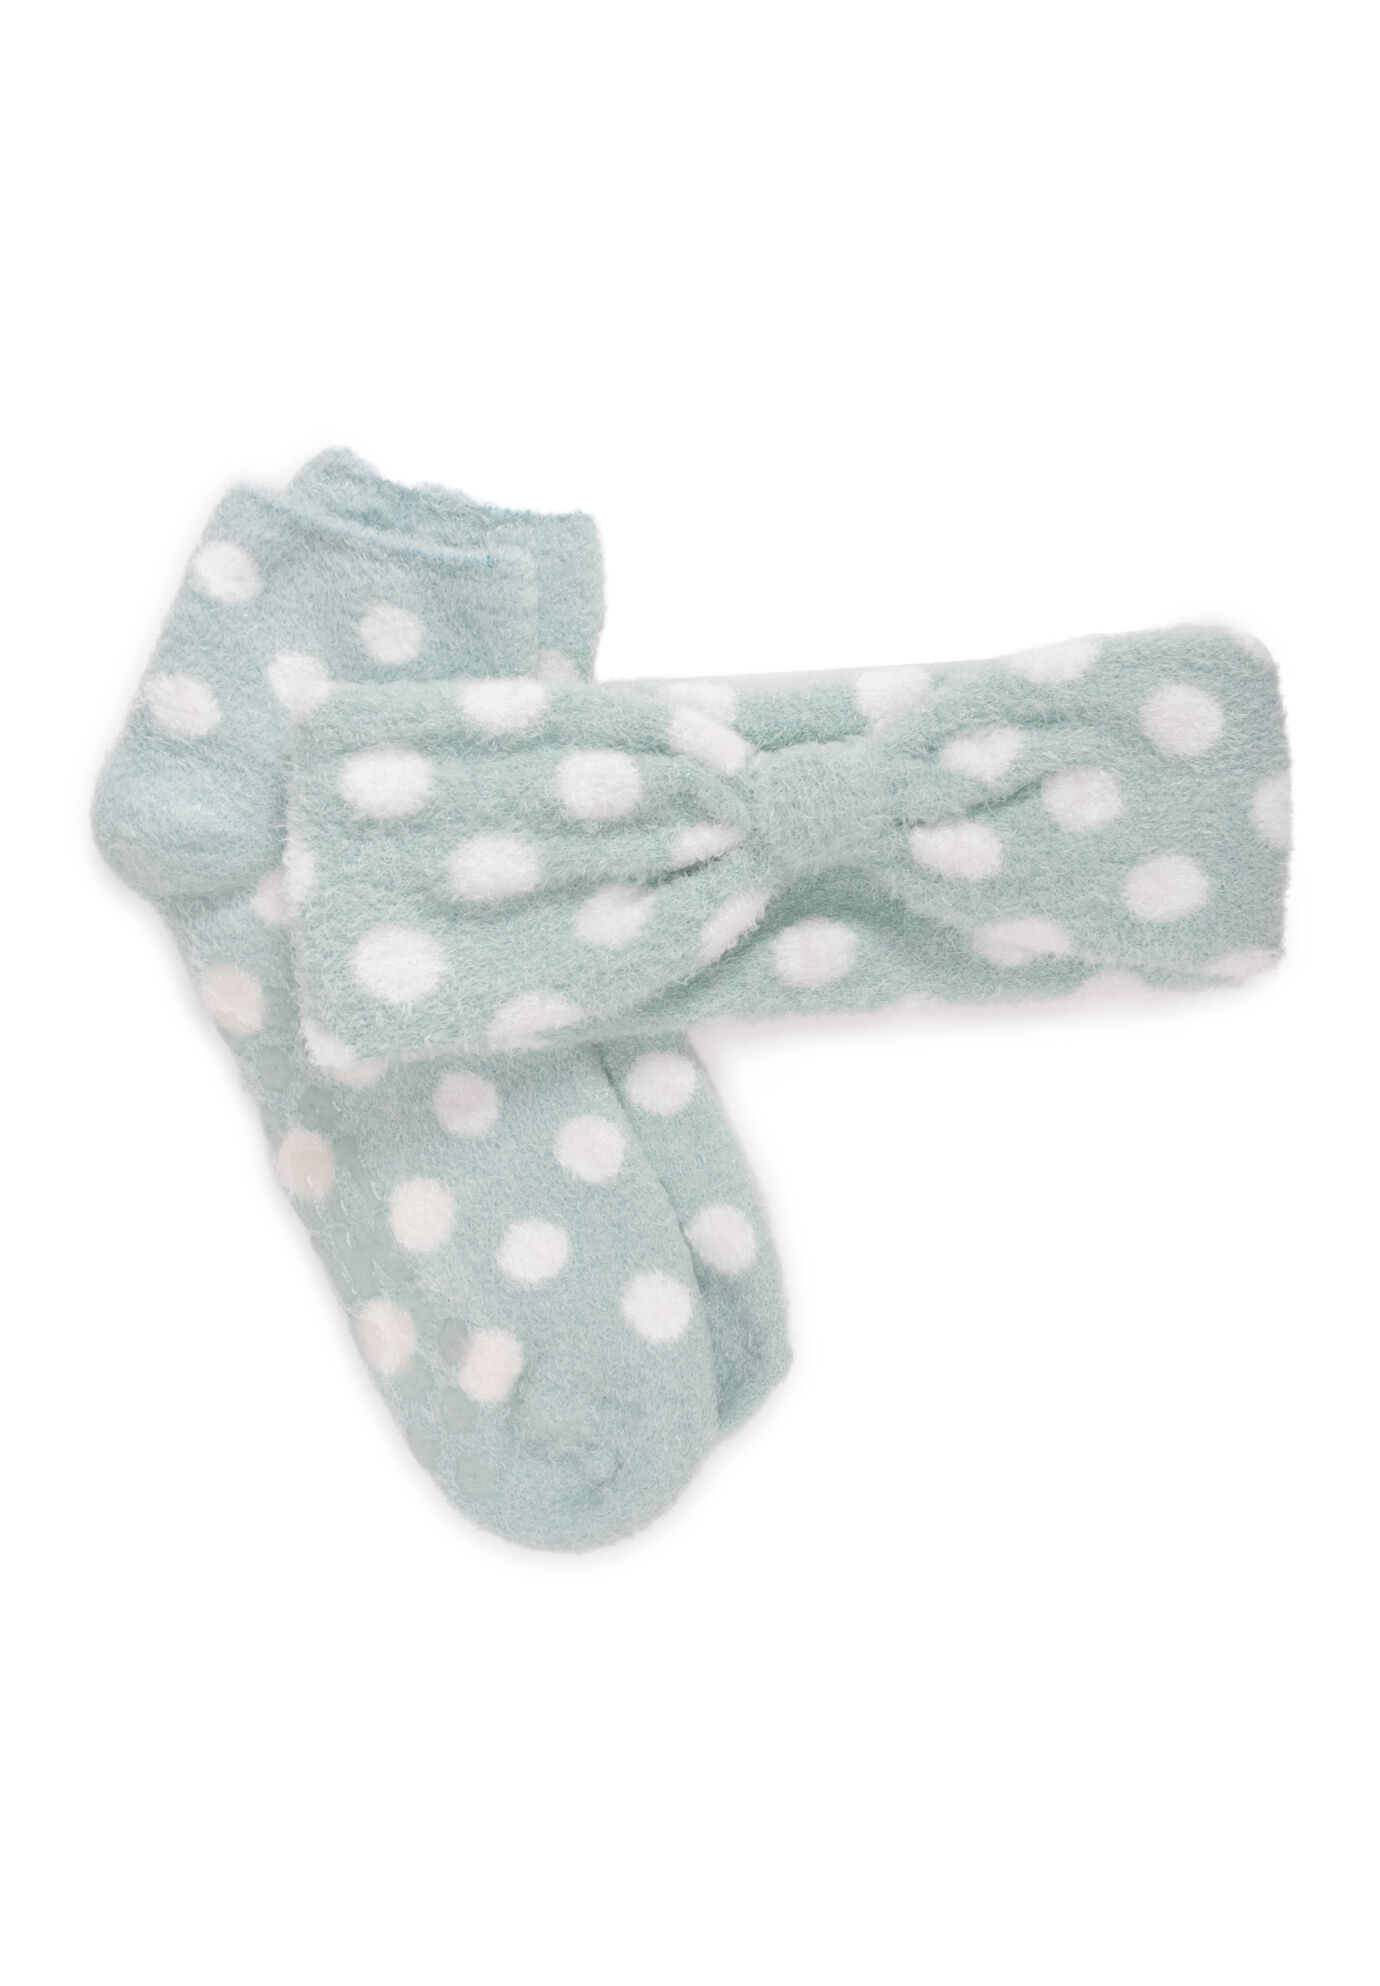 Women's Aloe Infused Sock And Headband Set by MUK LUKS in Mint (Size ONE)